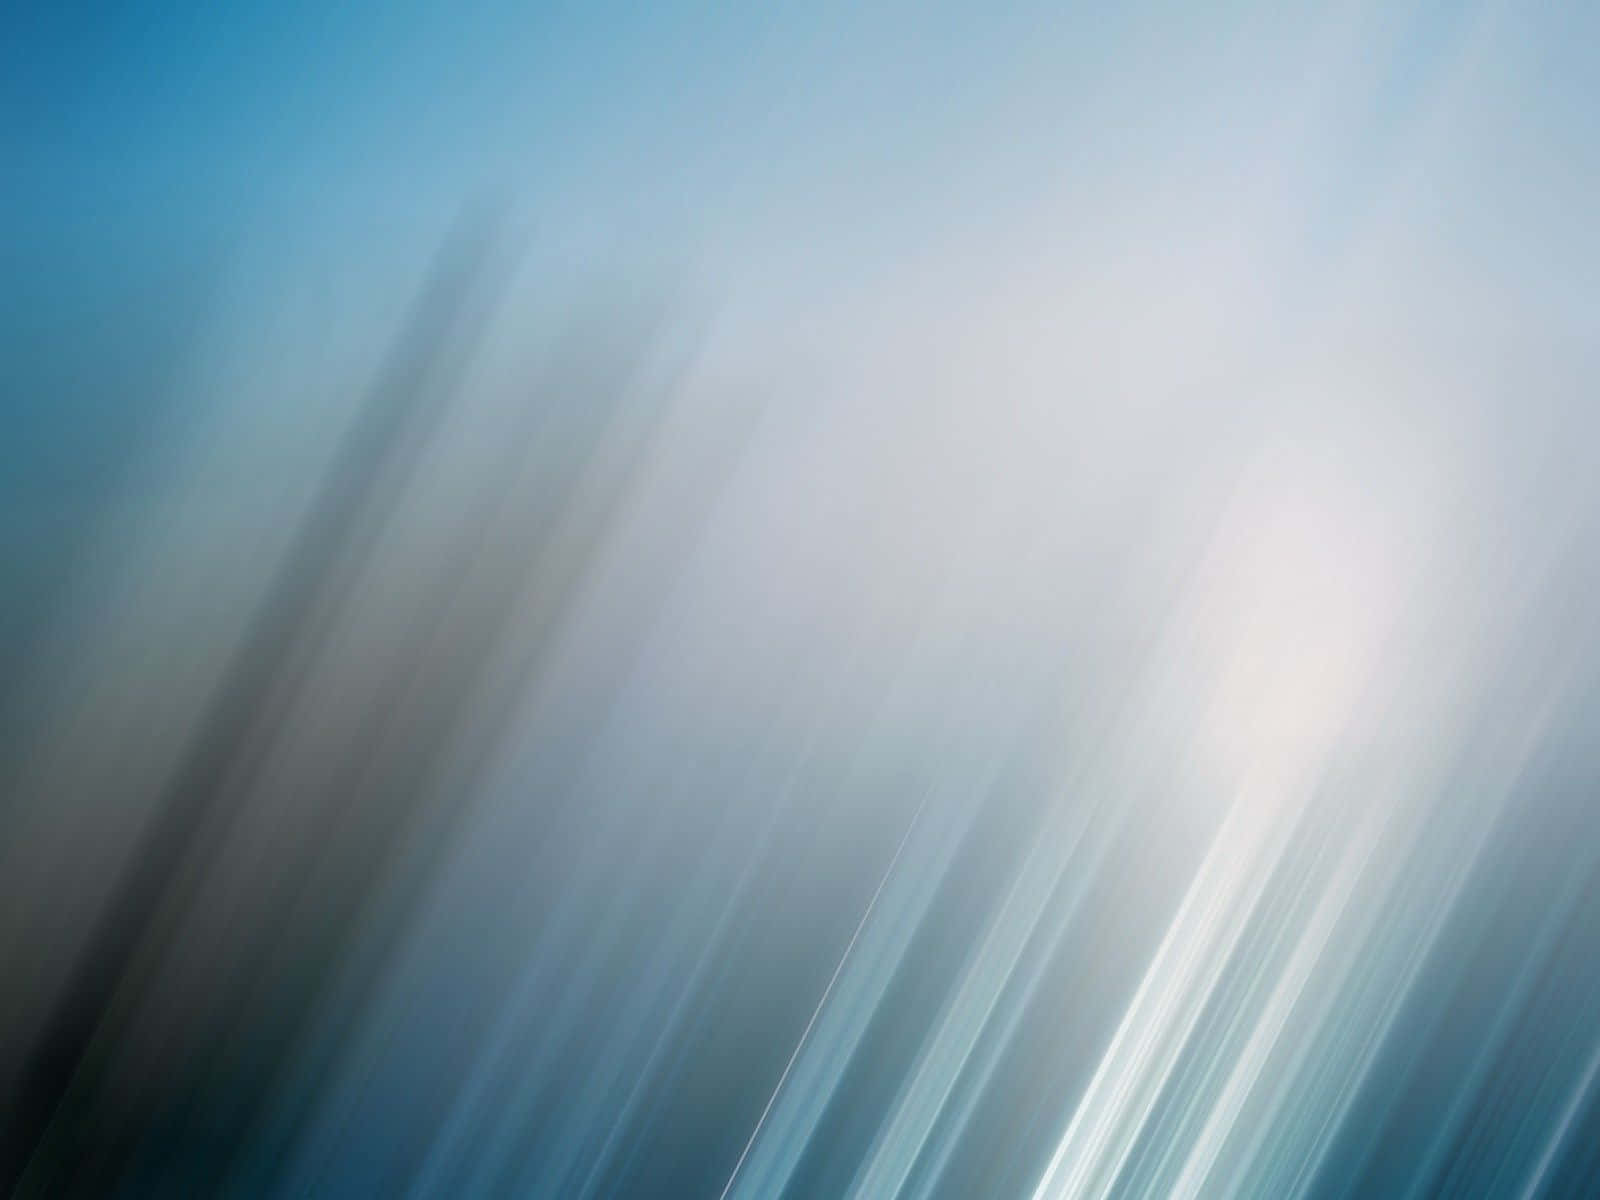 An abstract Blue and Gray landscape Wallpaper